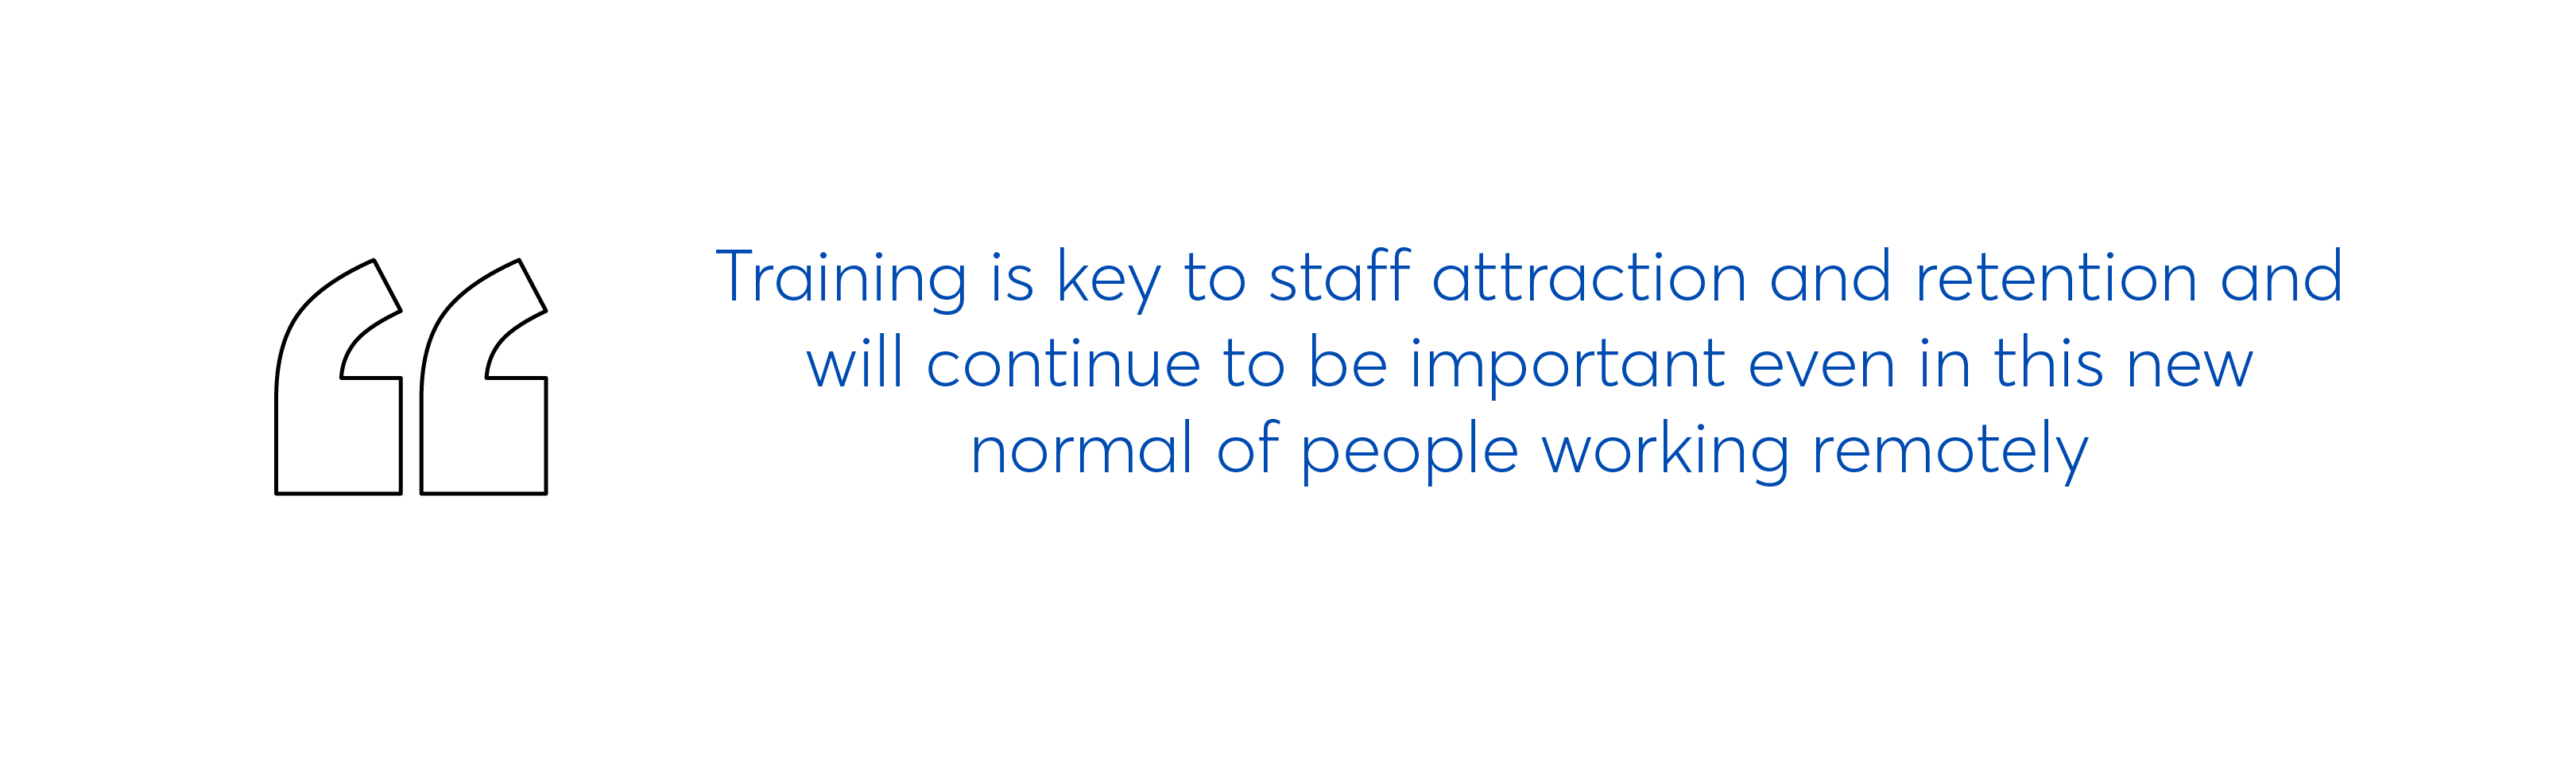 Training is key to staff attraction and retention